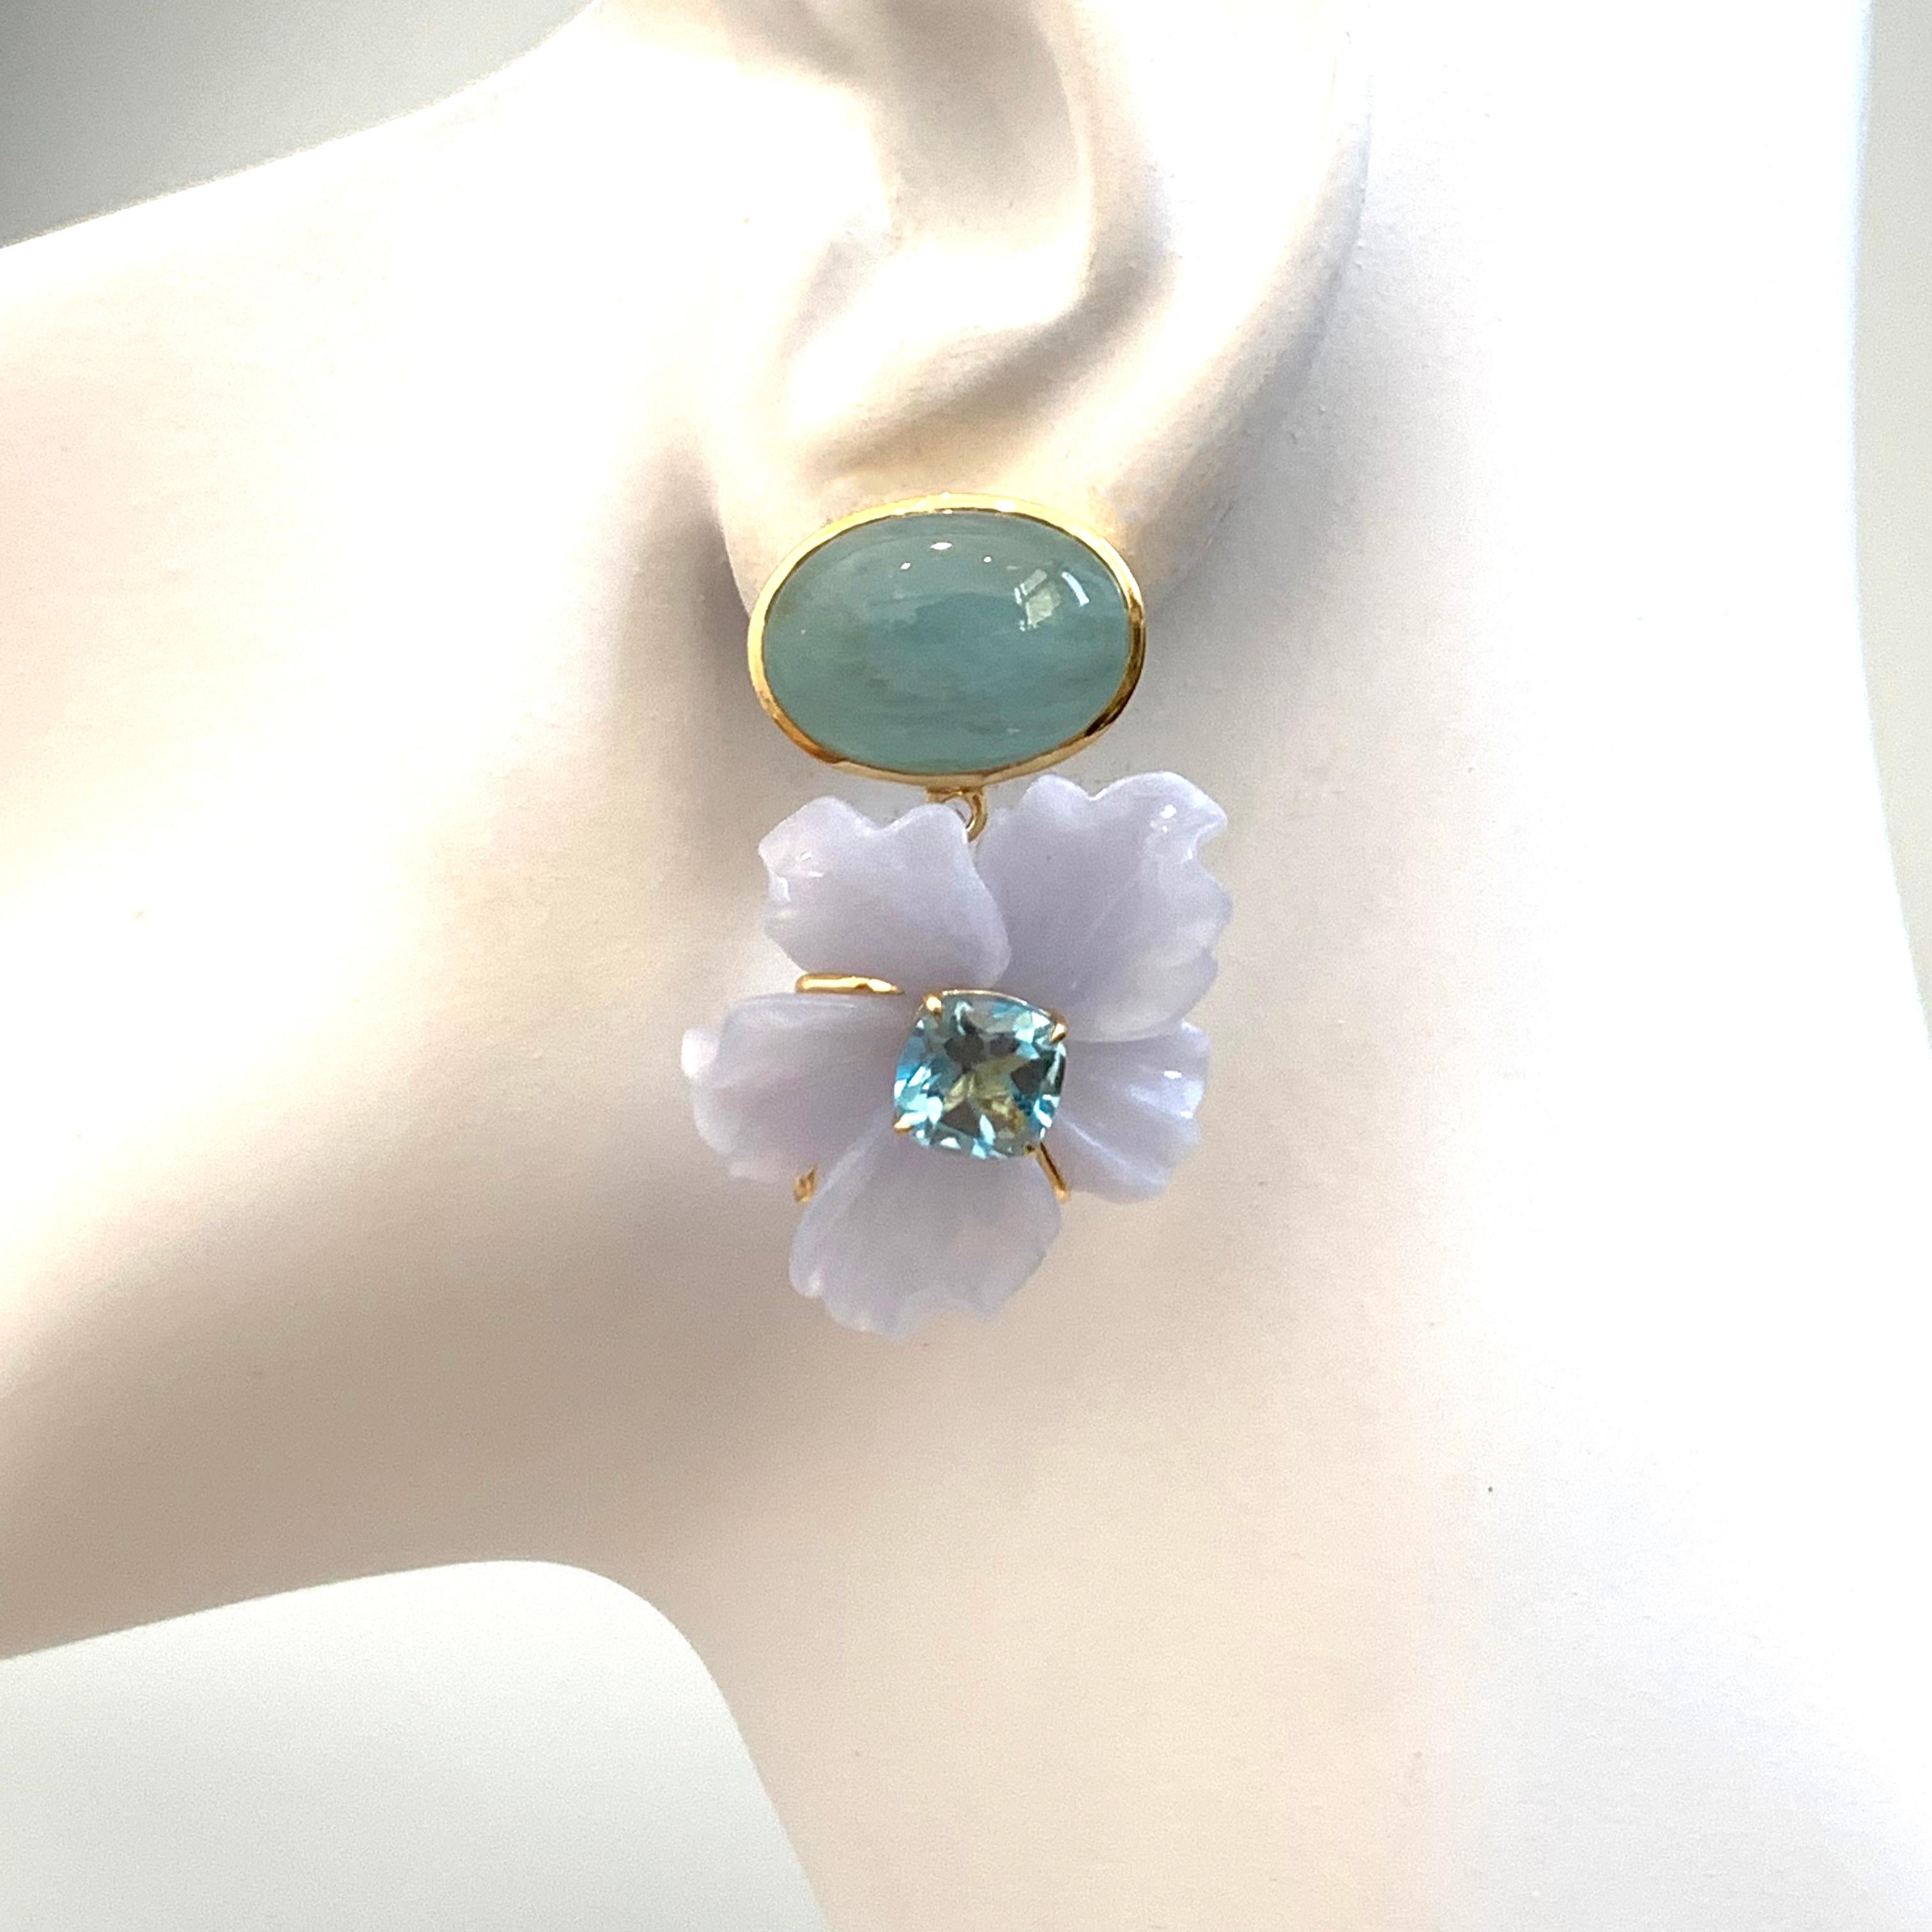 Stunning Cabochon Aquamarine and Carved Chalcedony Flower Drop Earrings 1